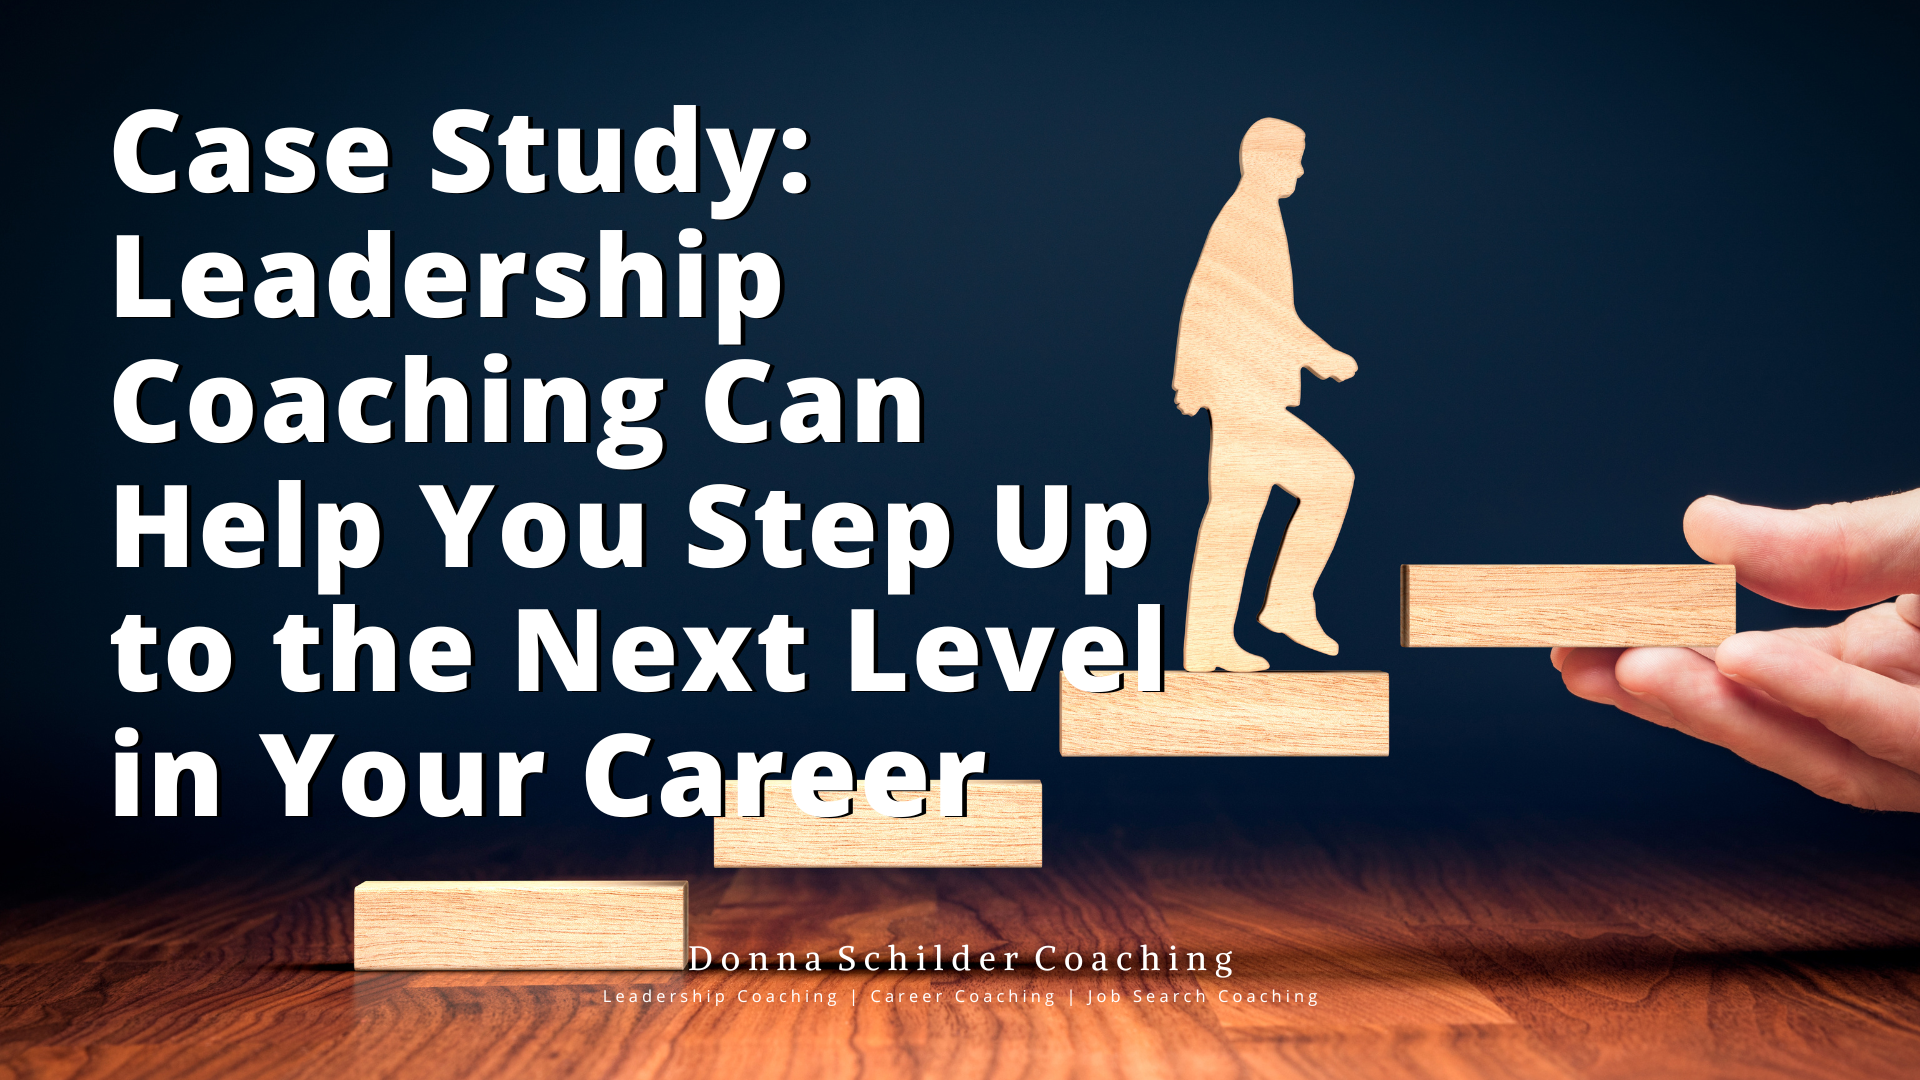 Case Study Leadership Coaching Can Help You Step Up to the Next Level in Your Career